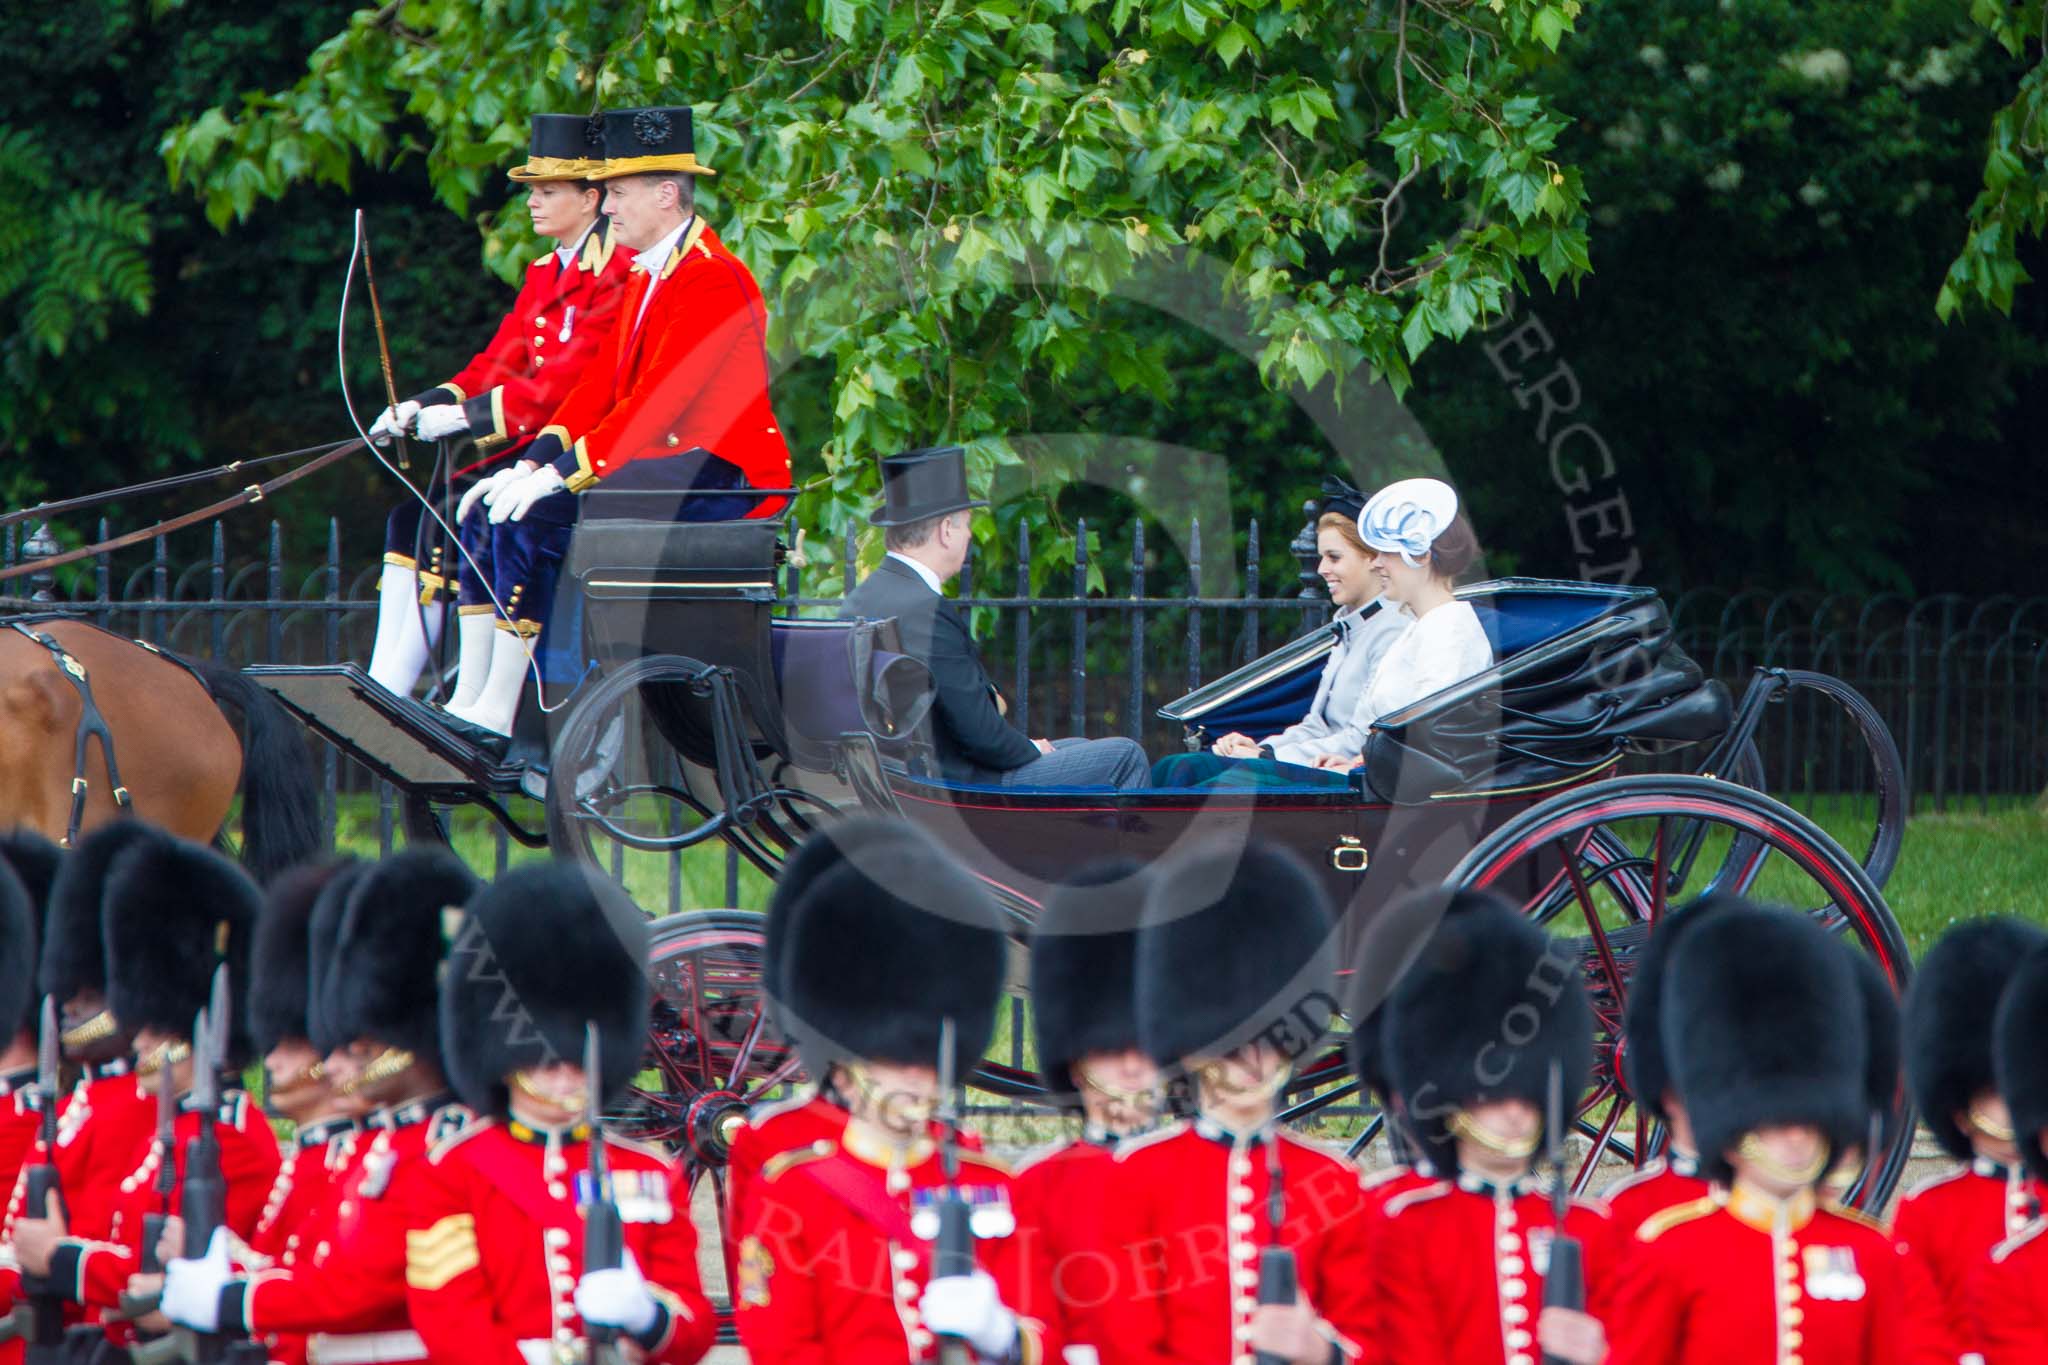 Trooping the Colour 2013: HRH The Duke of York  and his daughters, HRH Princess Beatrice of York and HRH Princess Eugenie of York in the second barouche carriage on the way across Horse Guards Parade to watch the parade from the Major General's office. Image #190, 15 June 2013 10:49 Horse Guards Parade, London, UK